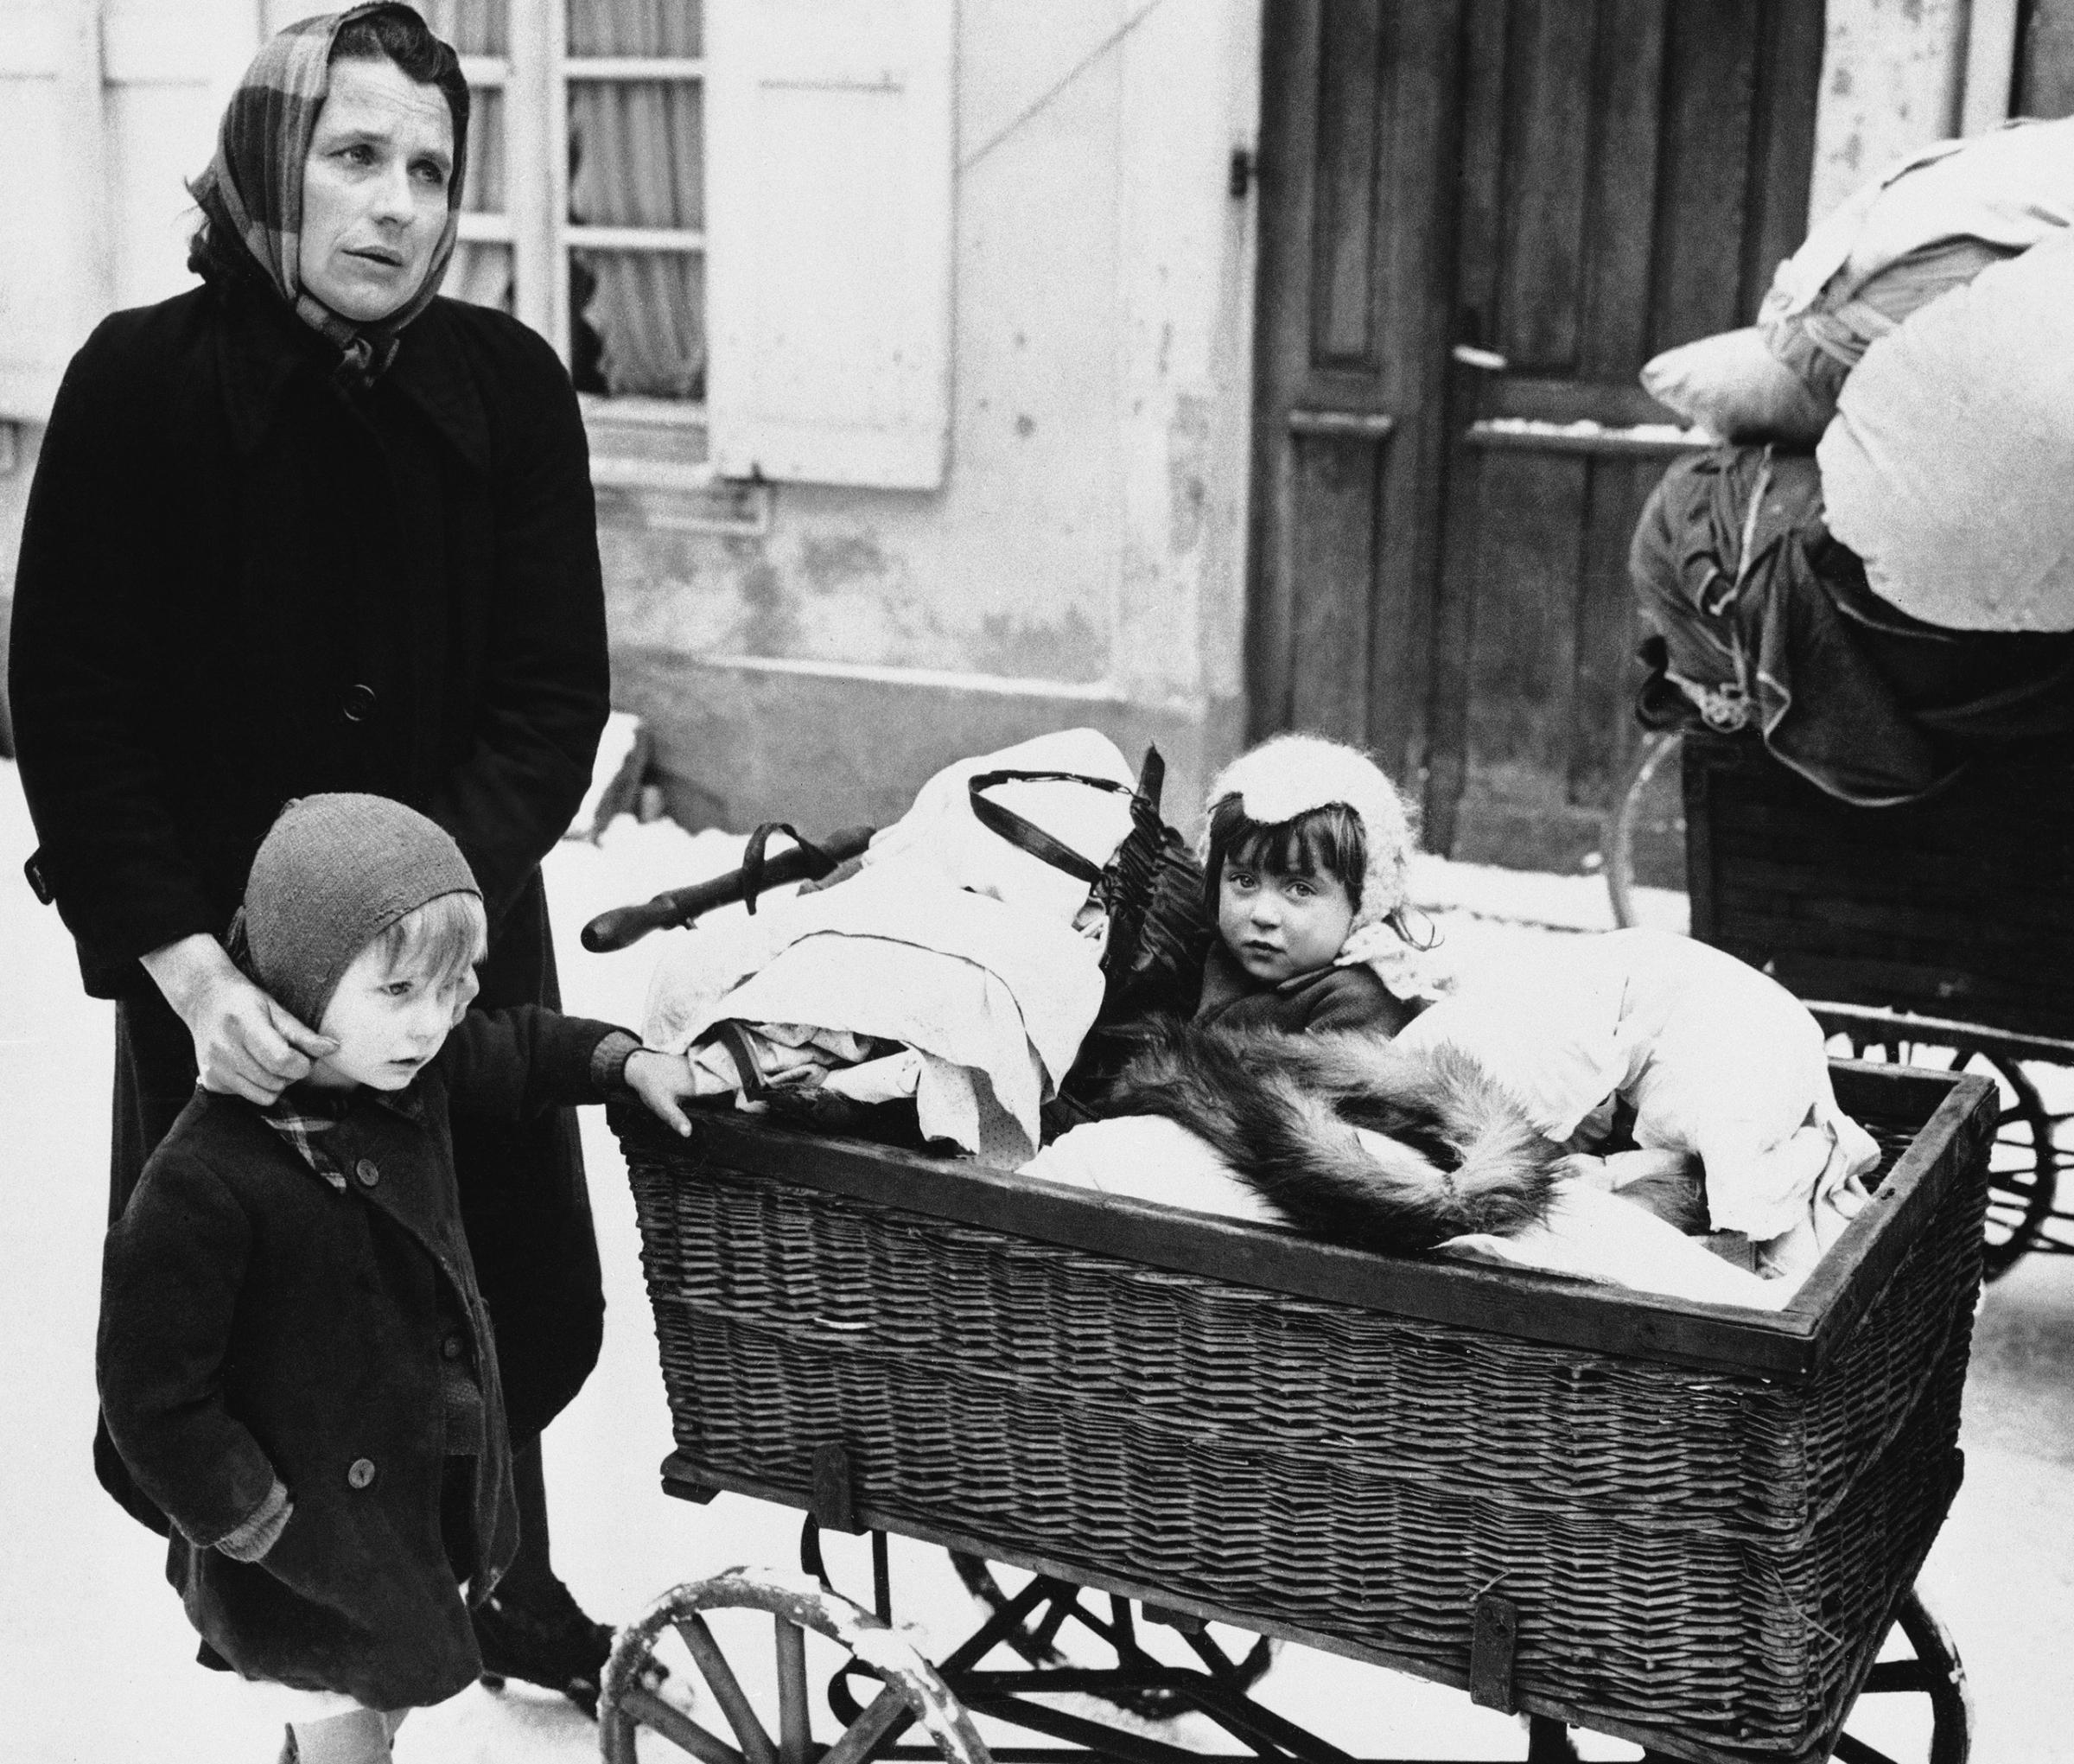 Frenchwoman with two children and belongings loaded on a baby carriage seen in Haguenau, France on Feb. 20, 1945, before they started on their long trek to a safe rear area. They are some of the refugees leaving the town because of the planned withdrawal of the 7th U.S. Army. Many civilians prefer to leave their homes and seek safety in a rear area, rather than suffer another German occupation or risk being conscripted into the German Vollksturn.